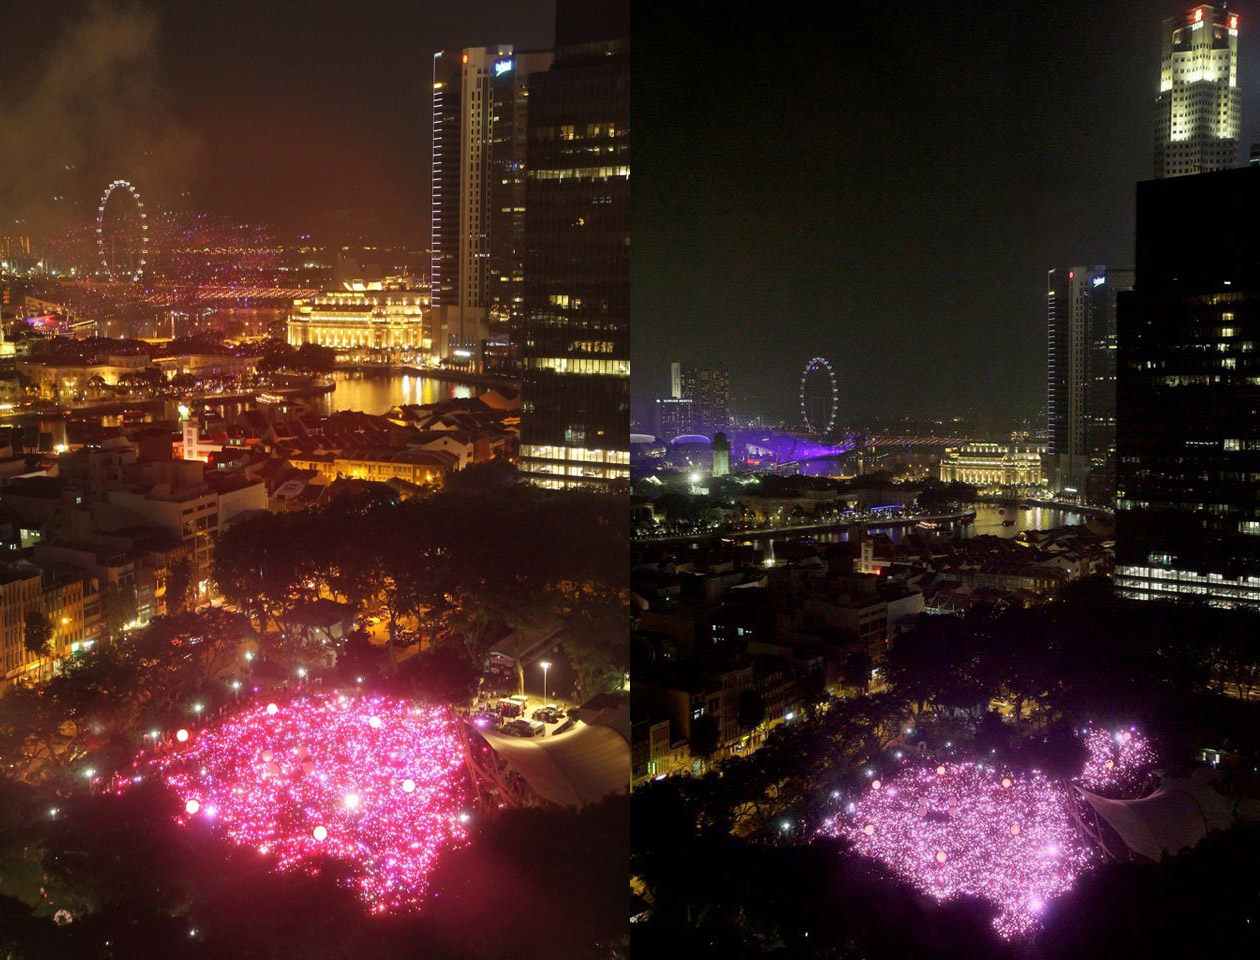 Figs 4 & 5. Left: Pink Dot, aerial view of Hong Lim Park in 2012, featuring approximately 15,000 participants. Right: Pink Dot, aerial view of Hong Lim Park in 2013, featuring approximately 21,000 participants. Pink Dot SG